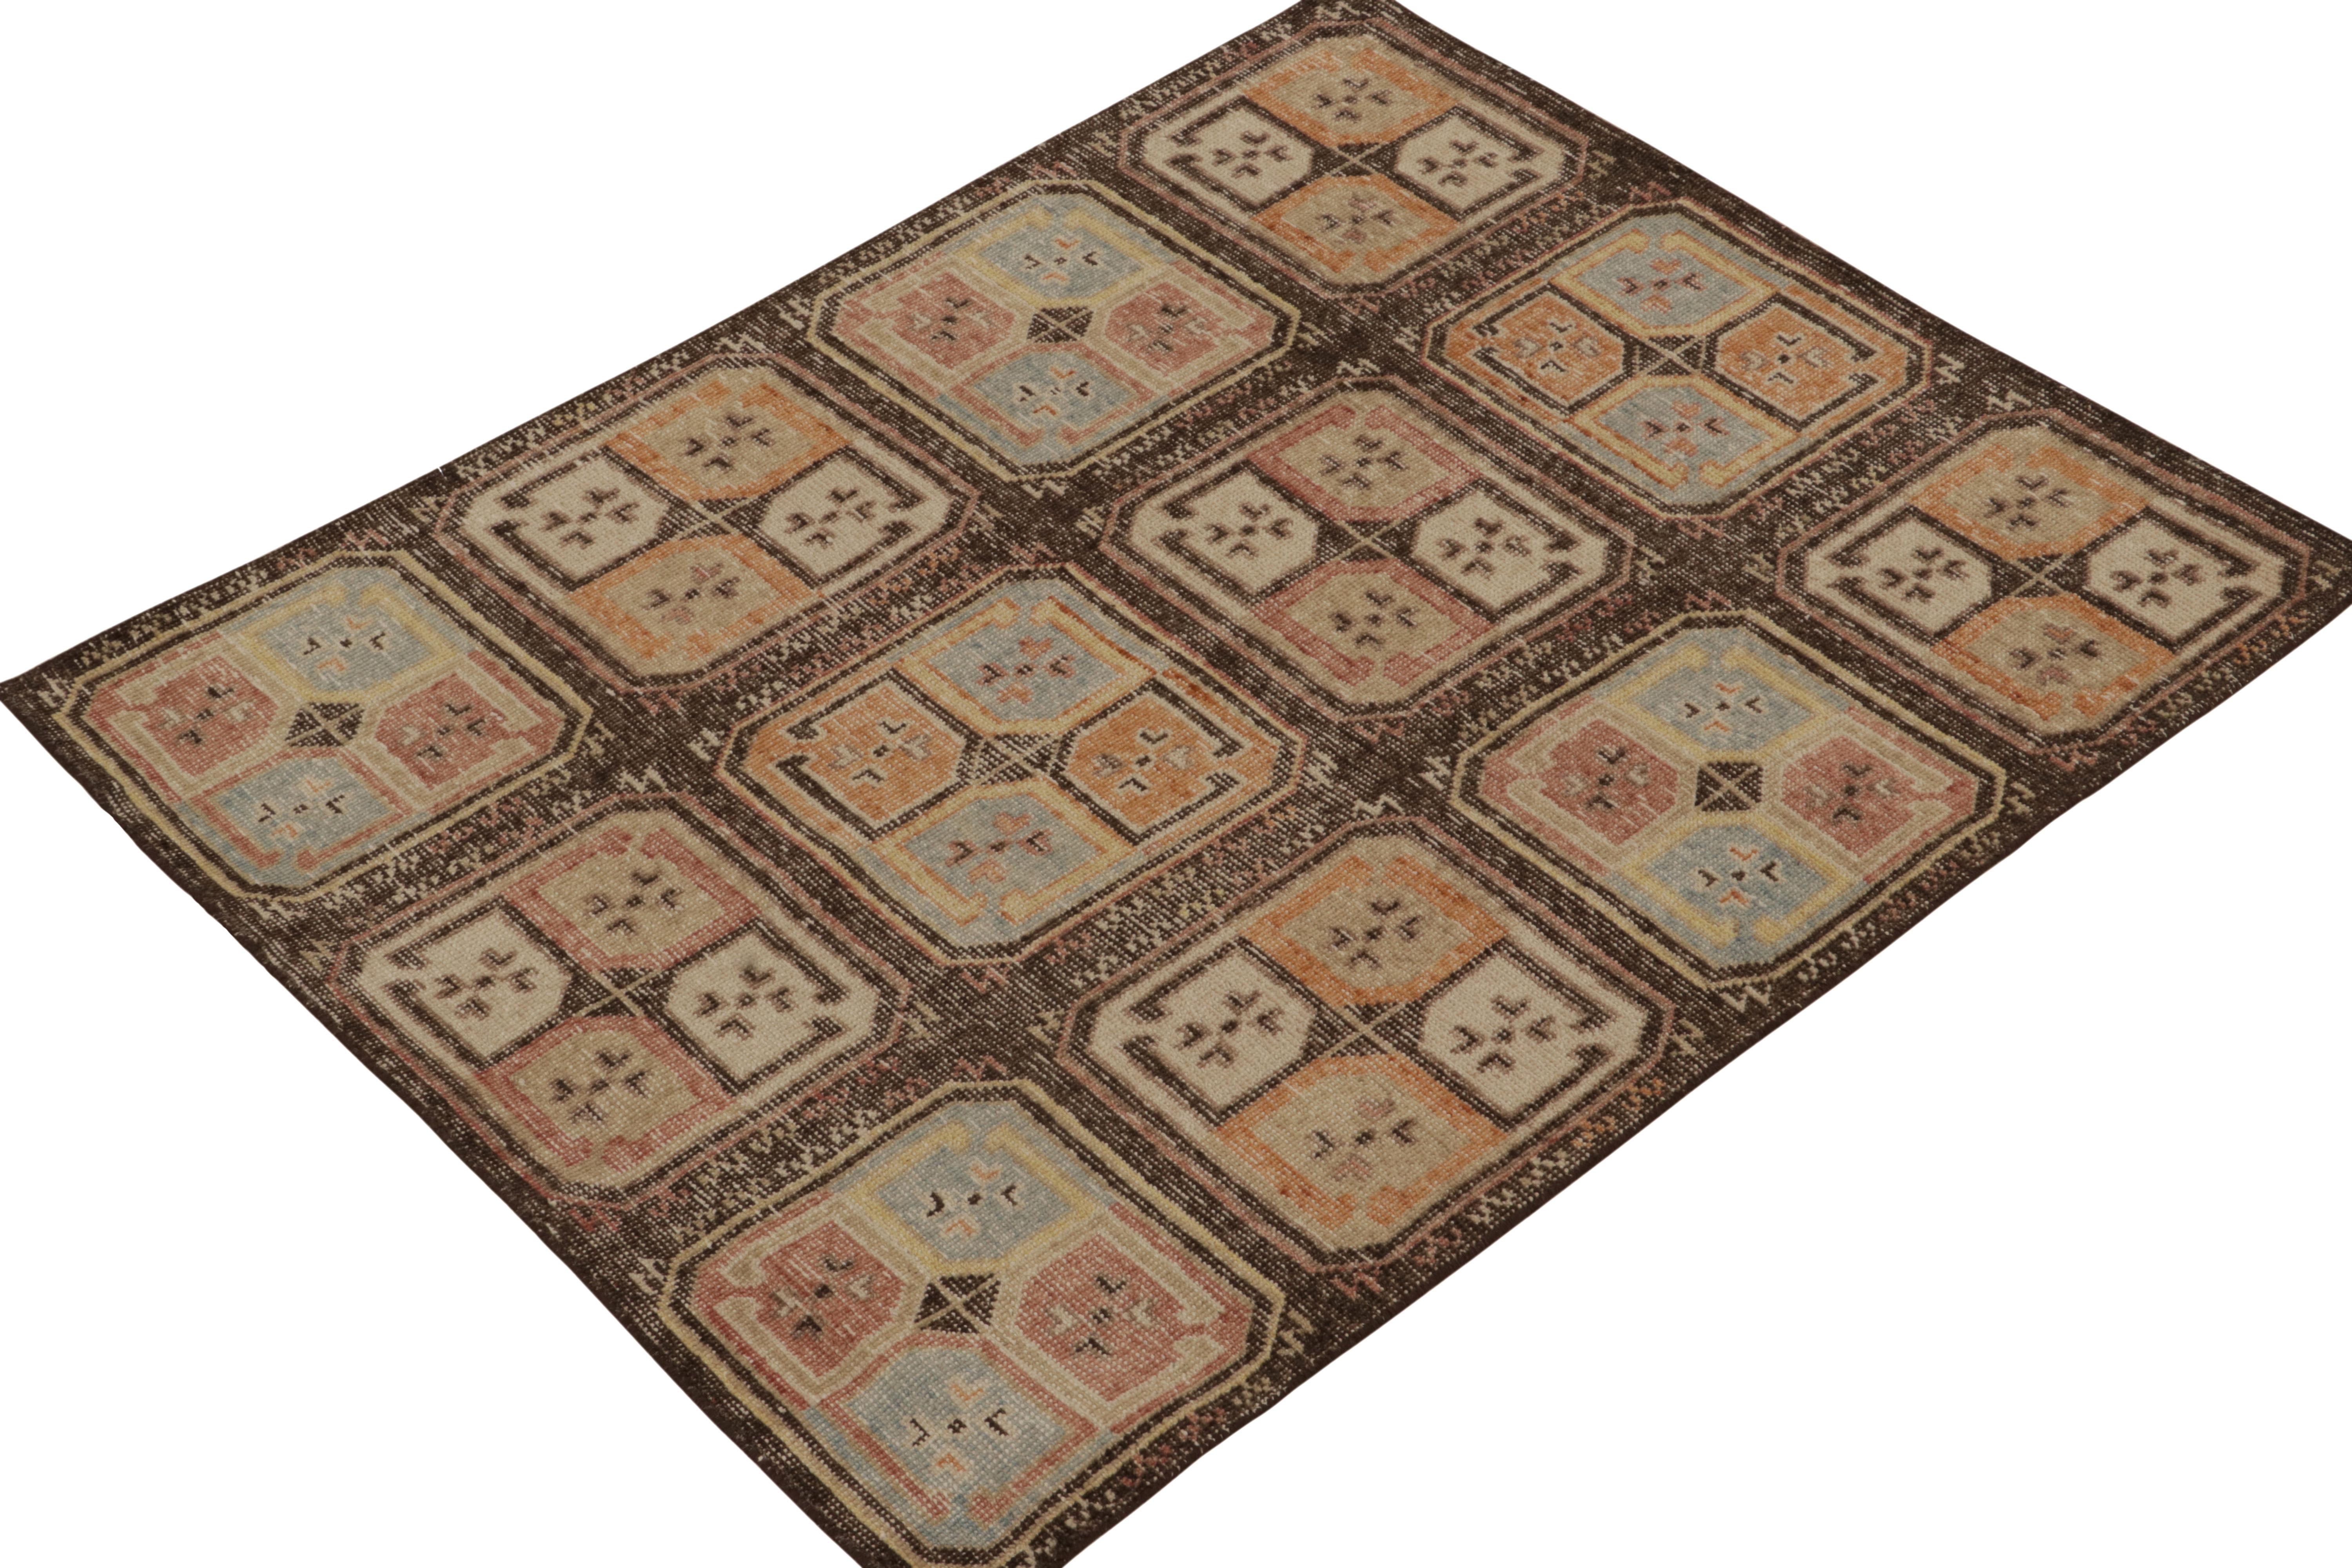 From Rug & Kilim’s Homage Collection, a 4x5 hand-knotted wool rug inspired by antique Turkmen textile designs of the late 19th century. 

On the Design: 

The tribal aesthetic is reimagined in our shabby chic aesthetics with rich beige-brown